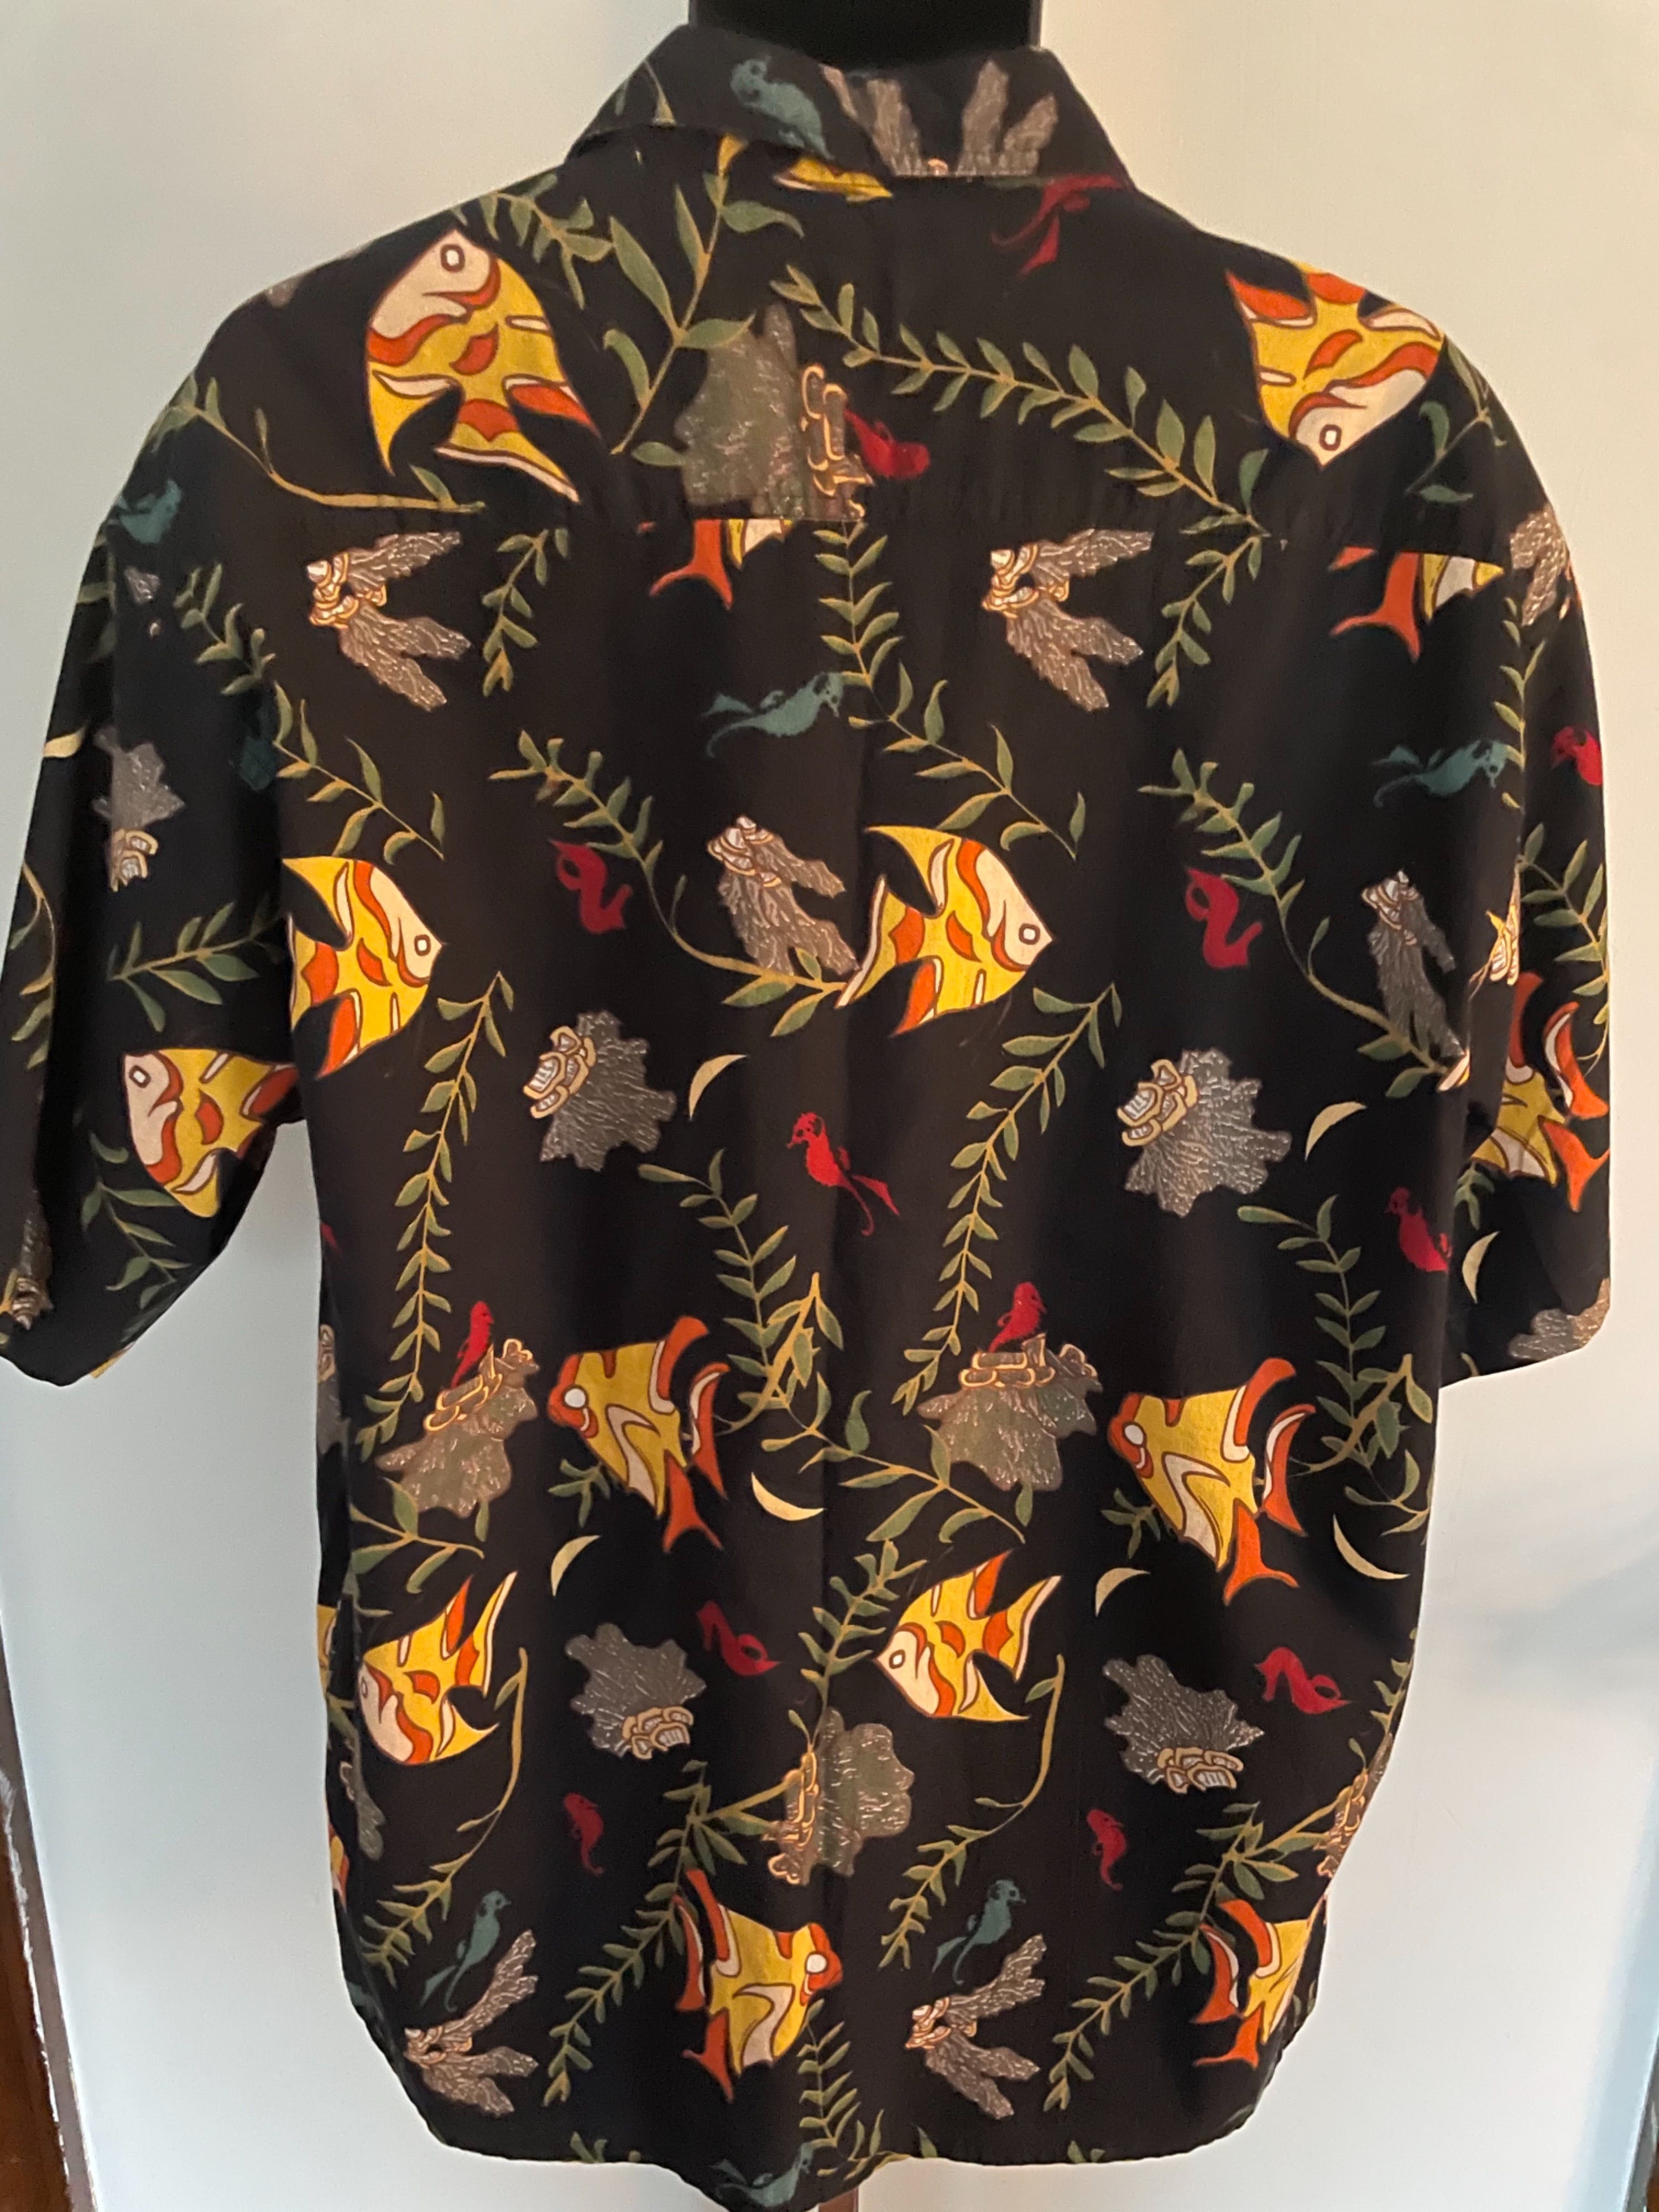 Vintage 90’s Tropical Fish Print Button Up Shirt by Threads Unlimited ...